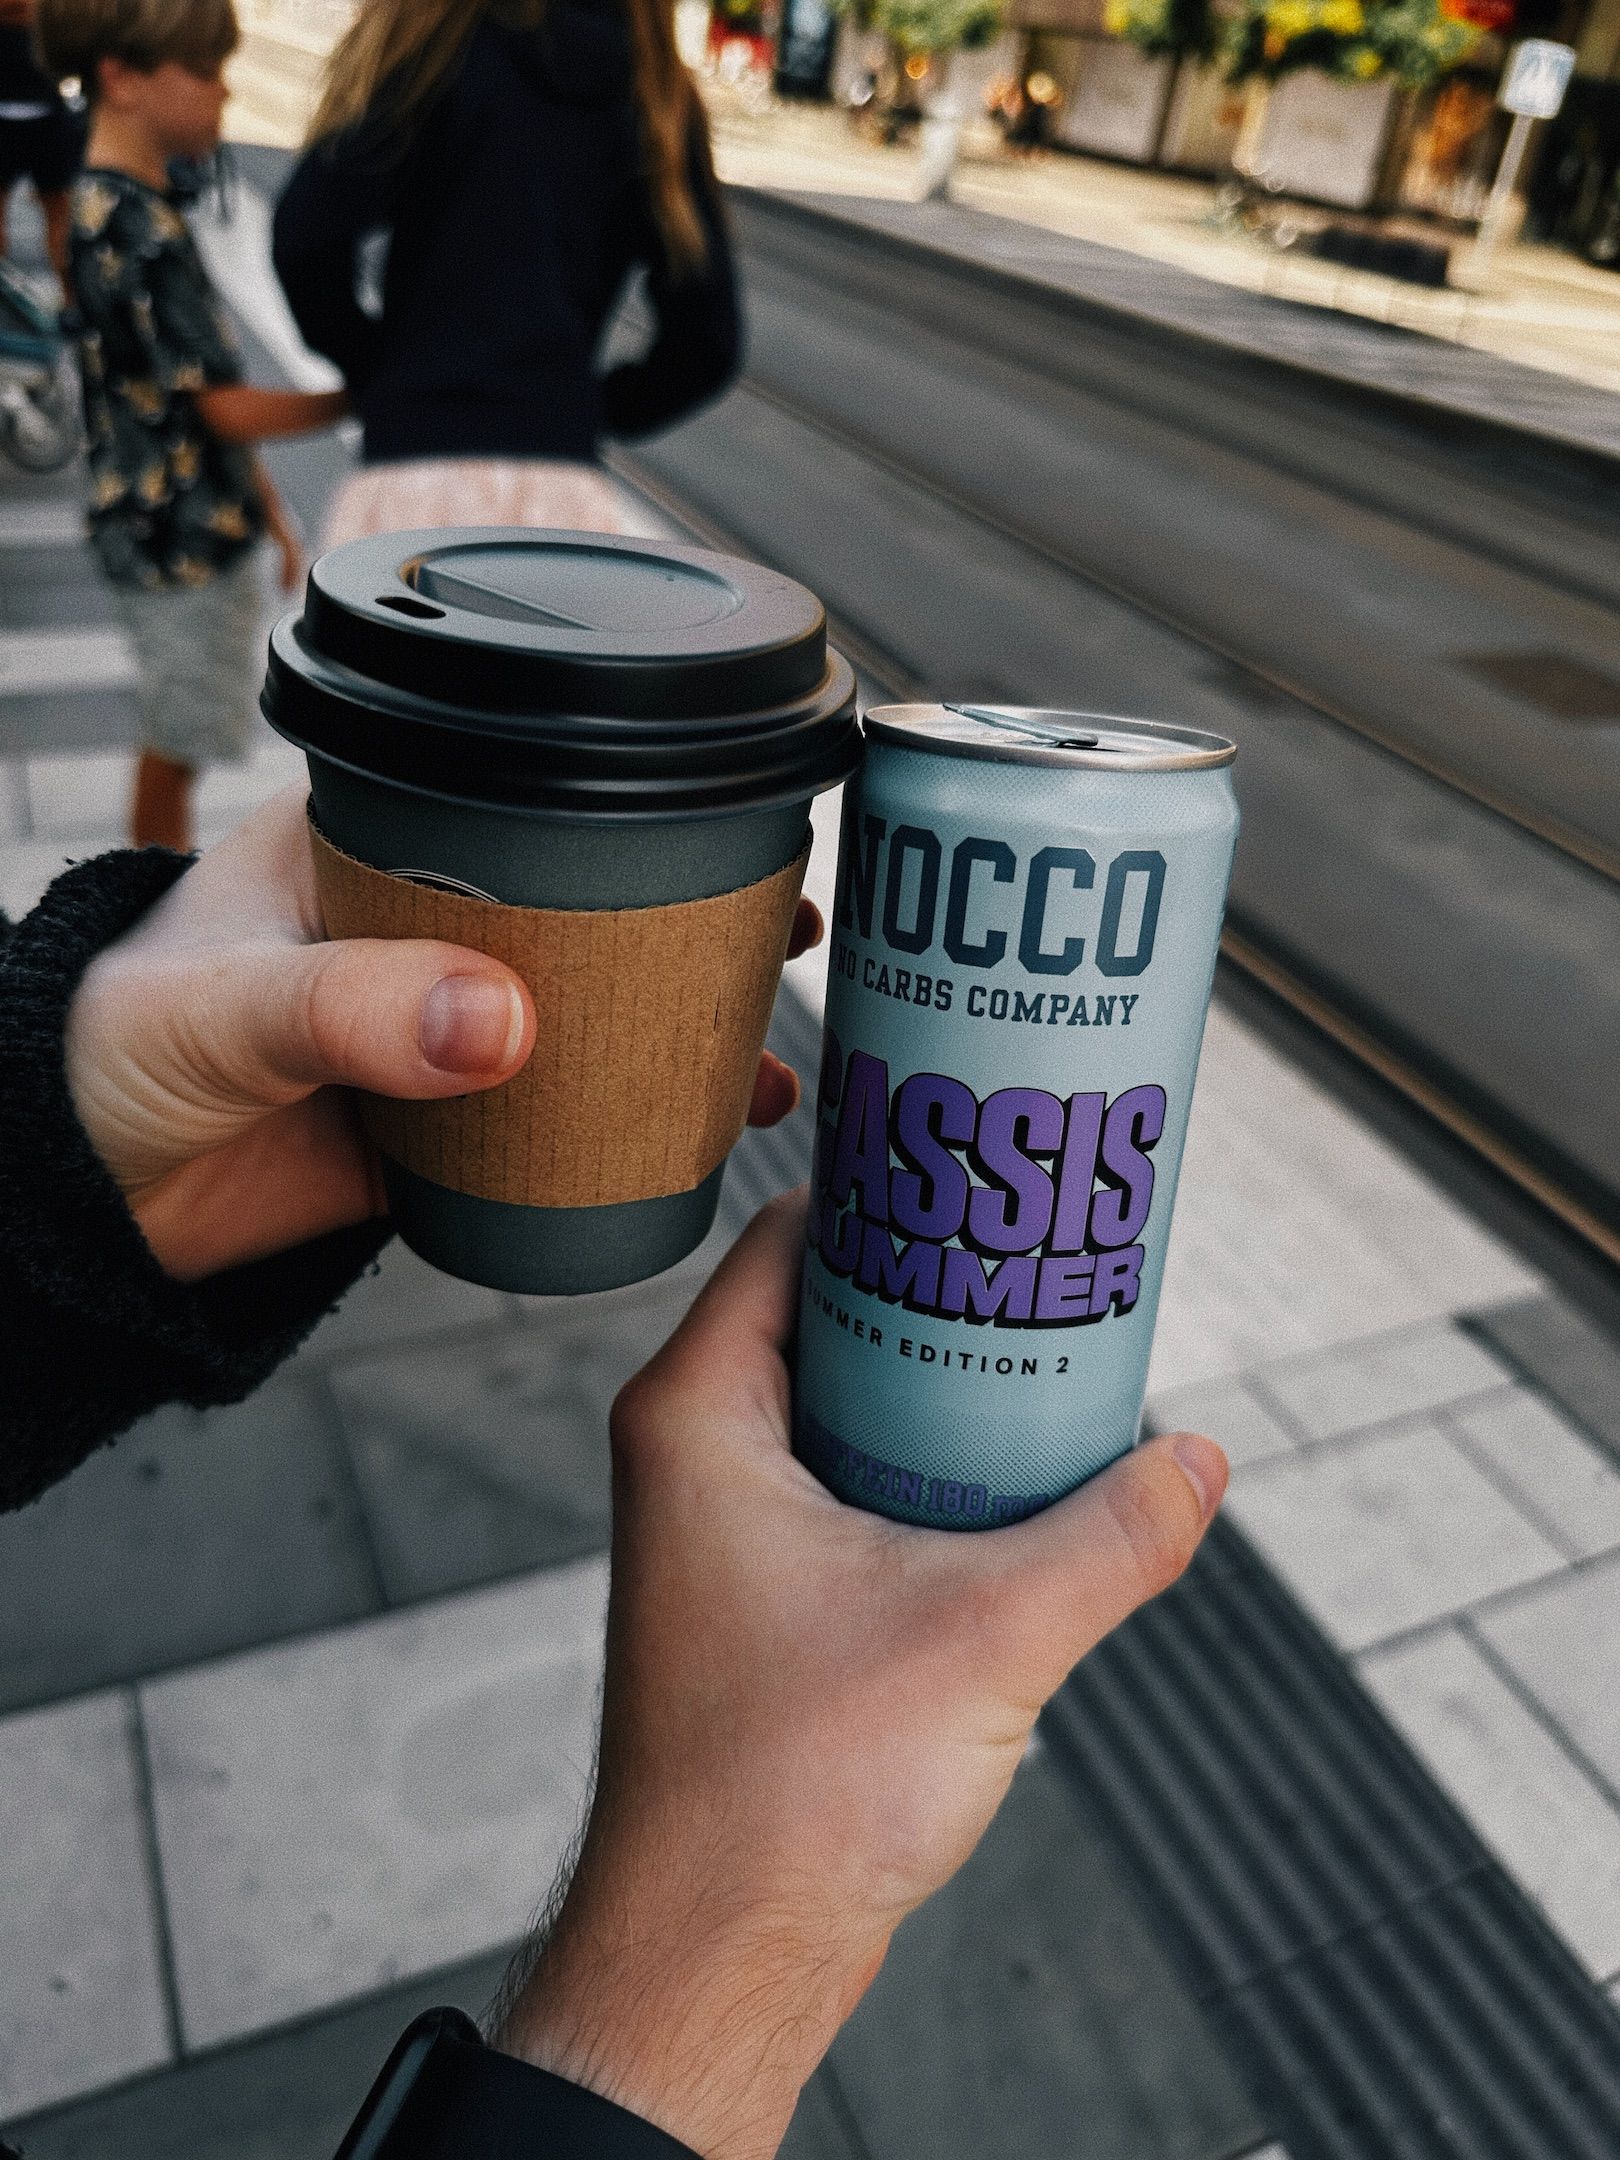 My favorite drink, a can of NOCCO.